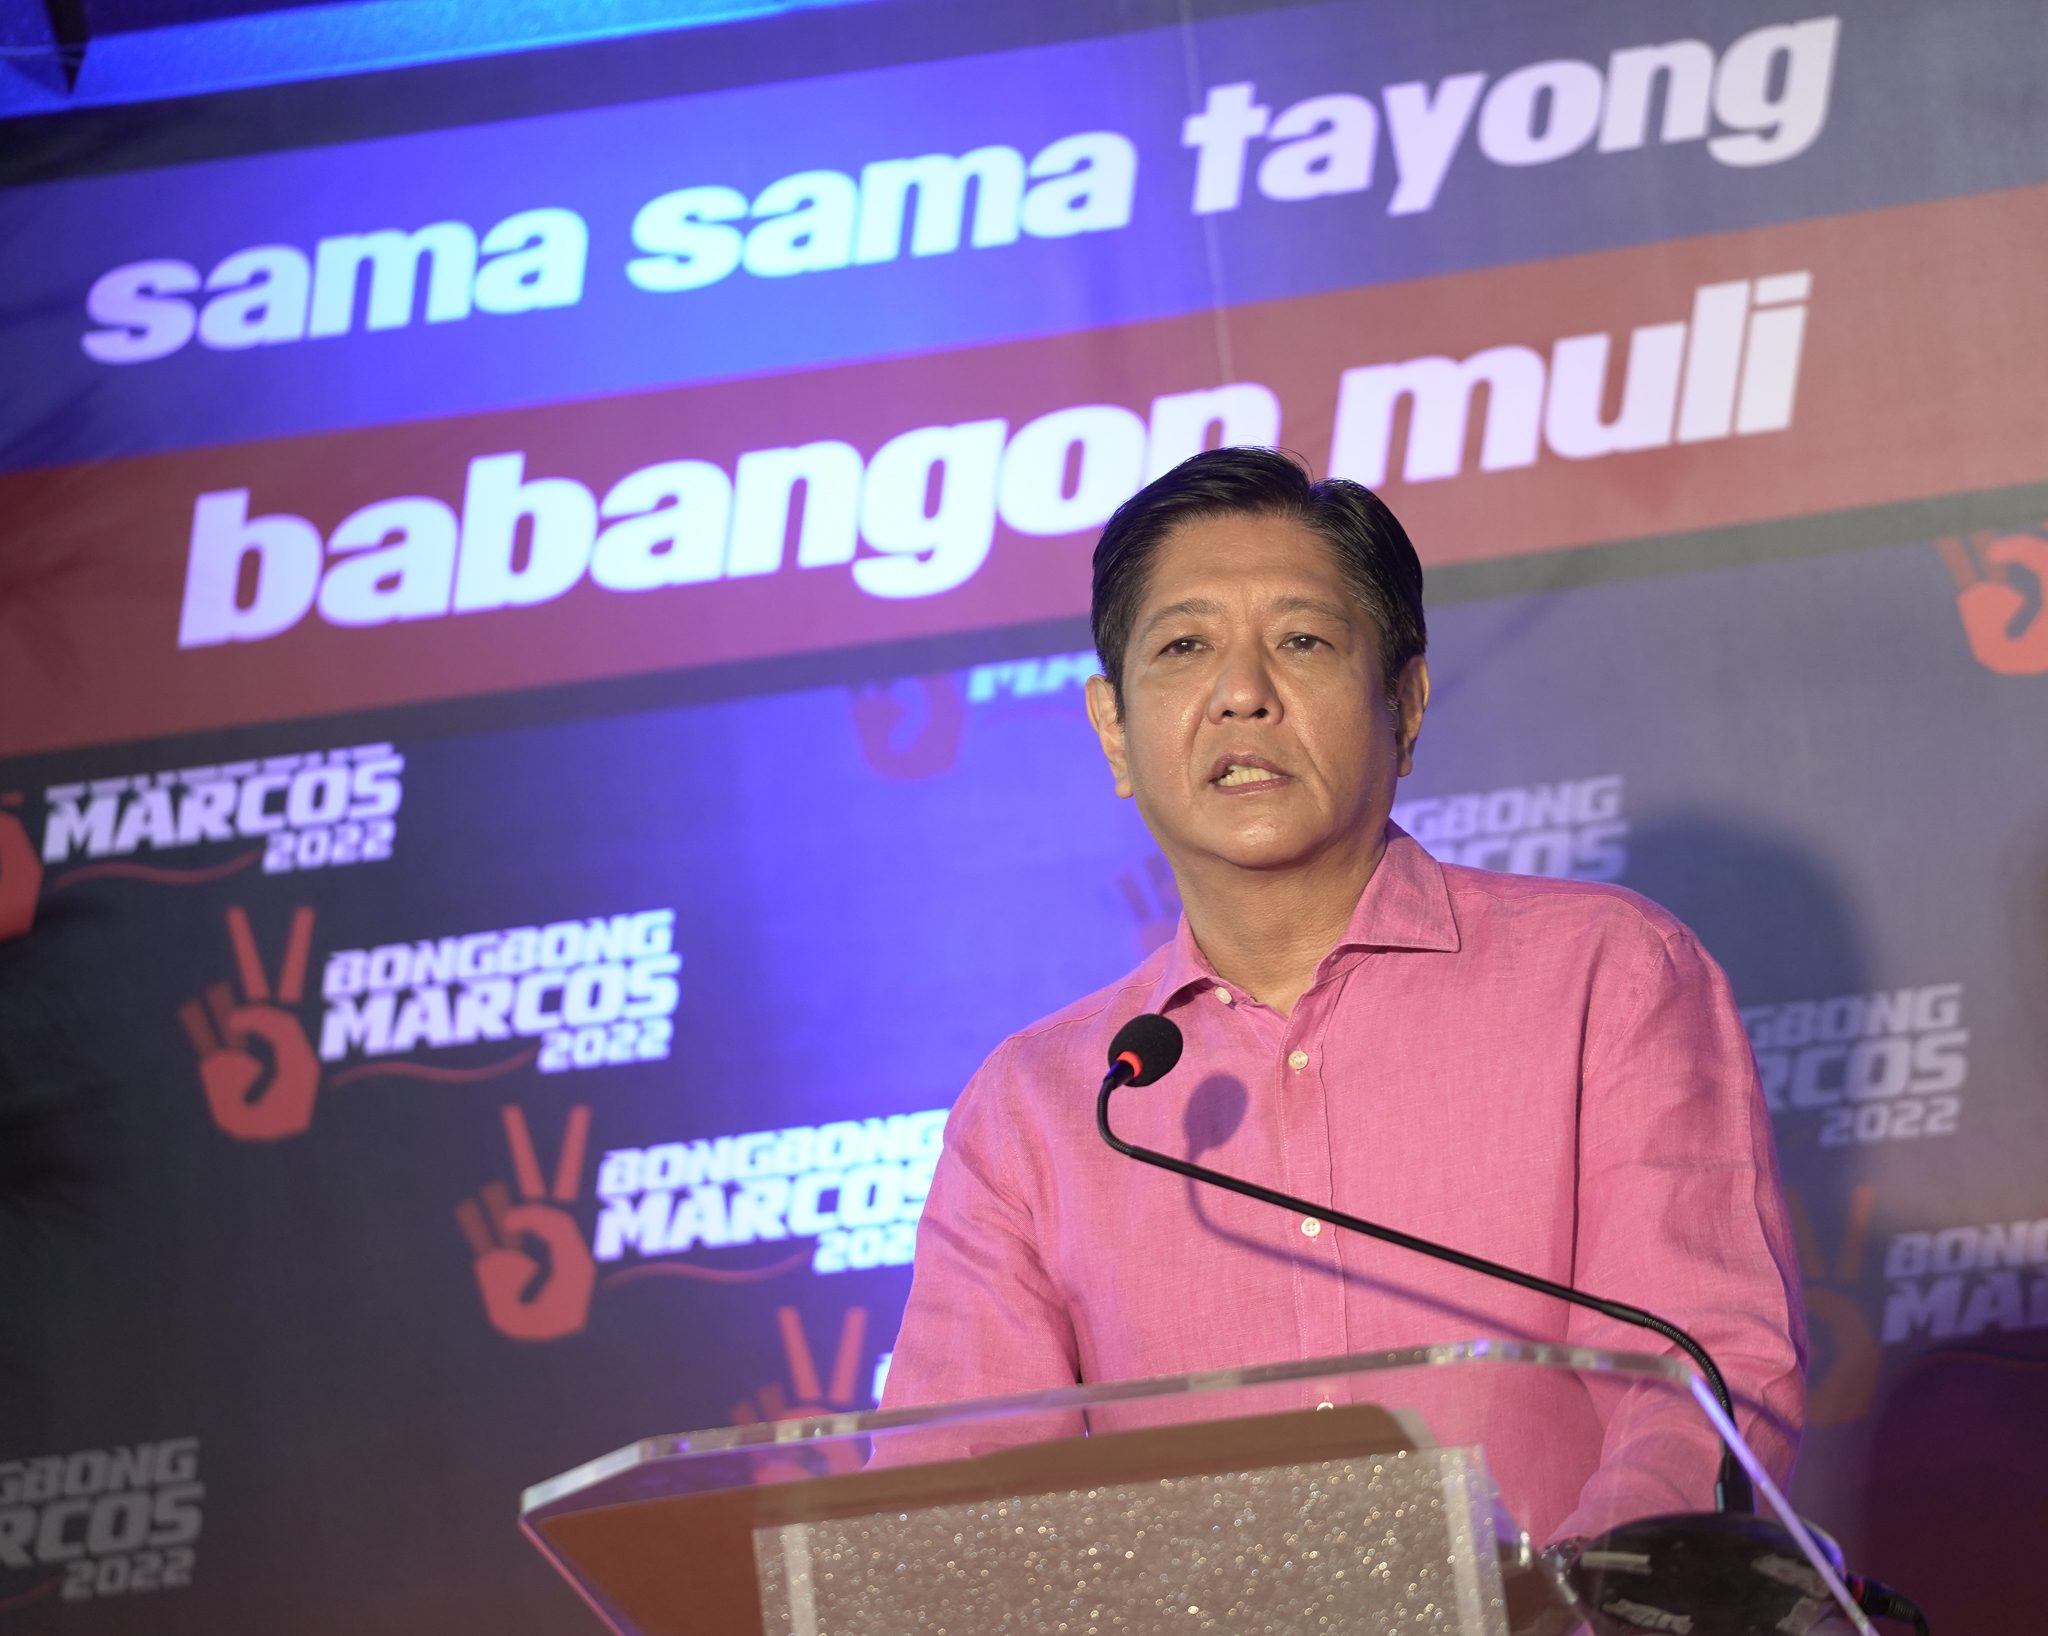 Dictator’s son Bongbong Marcos to run for president in 2022